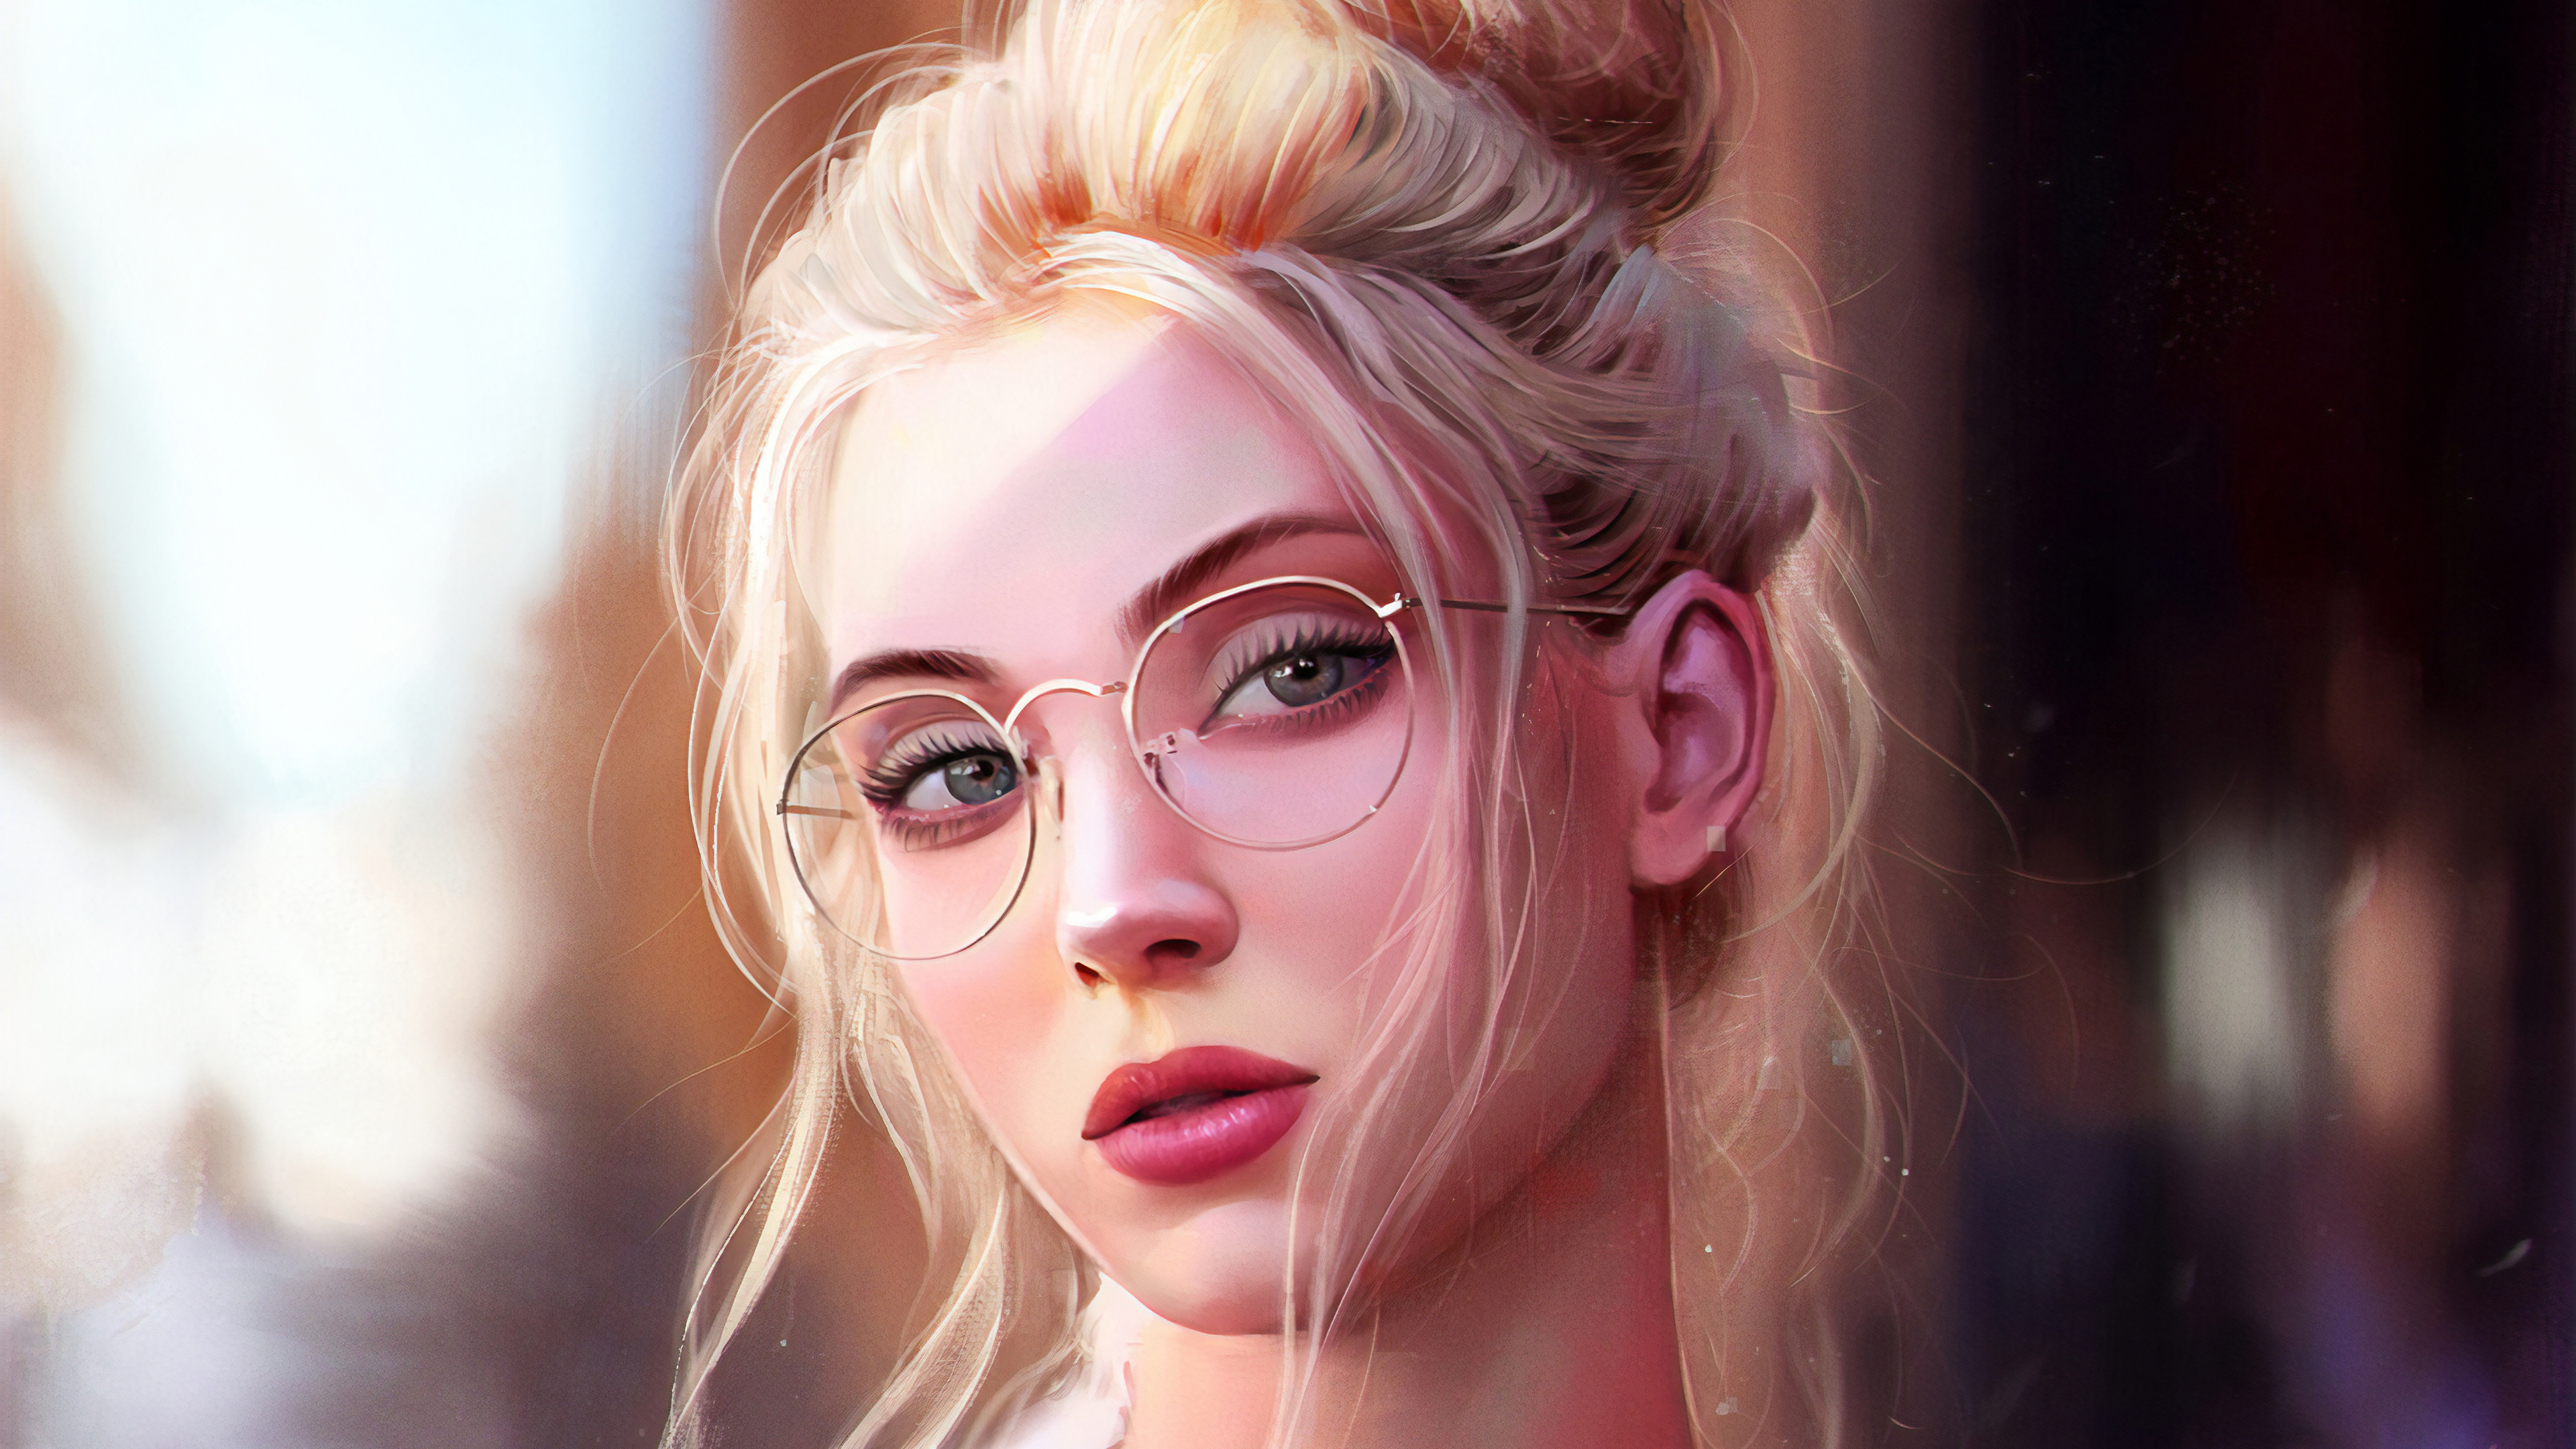 How to Draw Blonde Hair - Step by Step Tutorial for Digital Art - wide 3